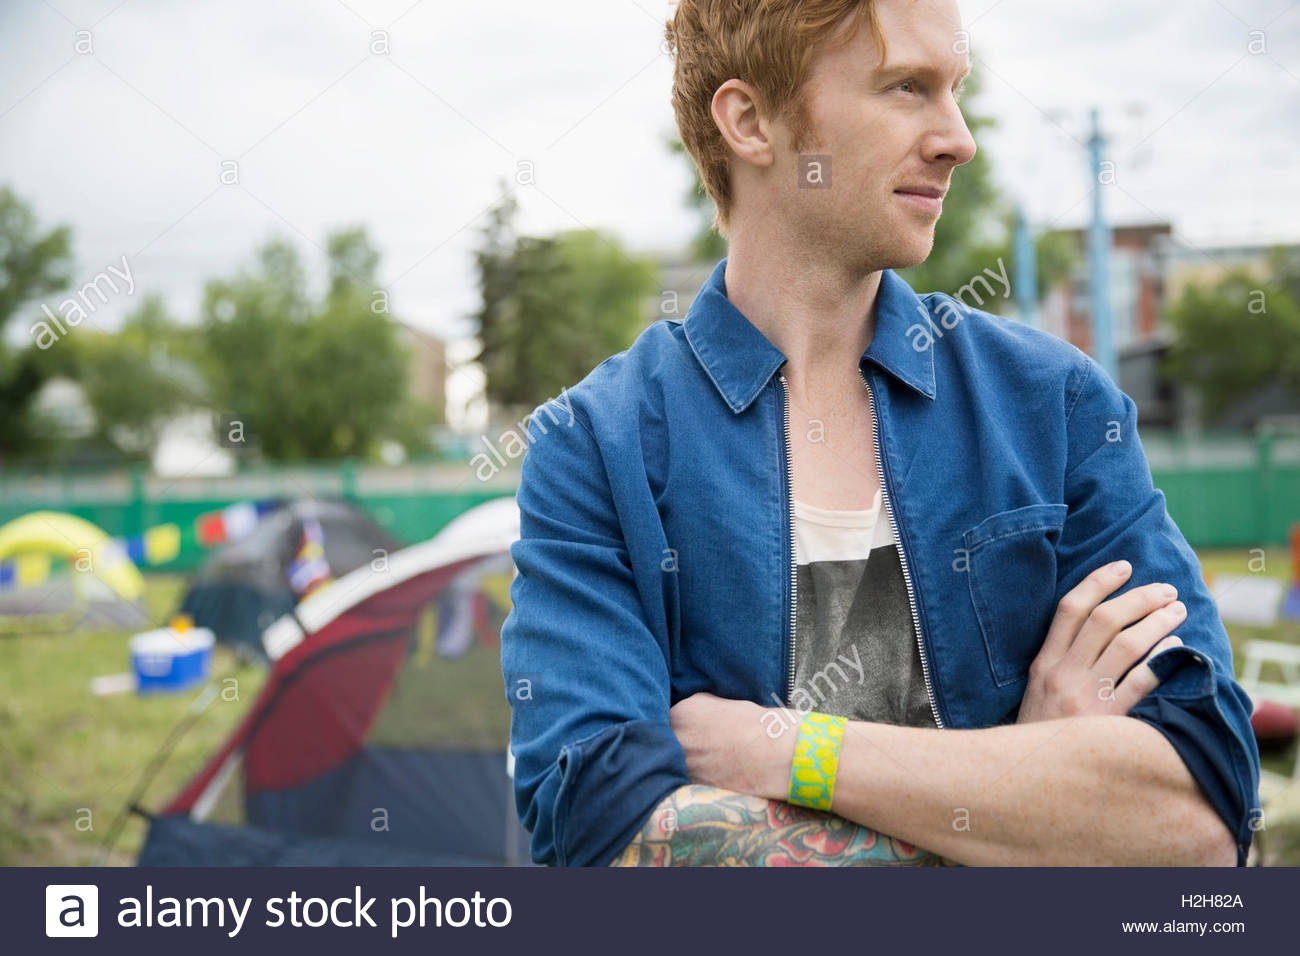 Portrait pensive young man with red hair looking away at summer music festival campsite Stock Photo